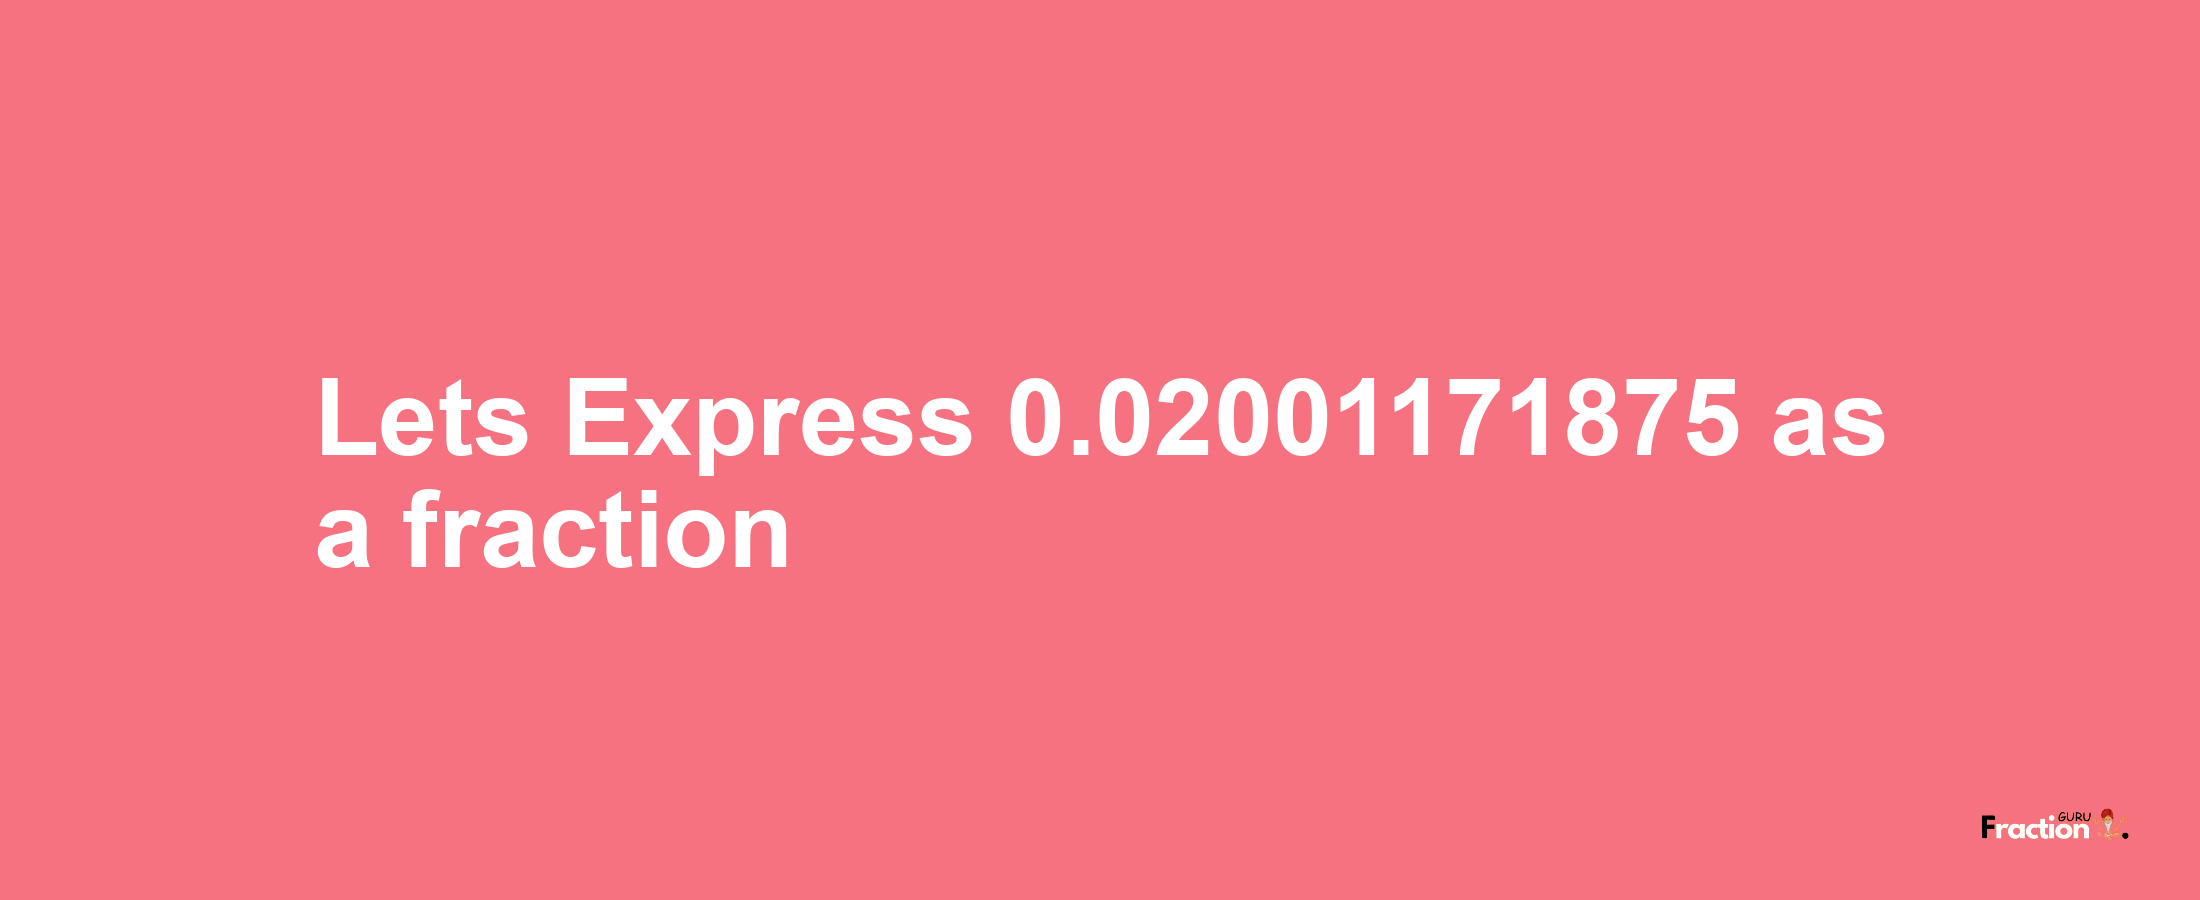 Lets Express 0.02001171875 as afraction